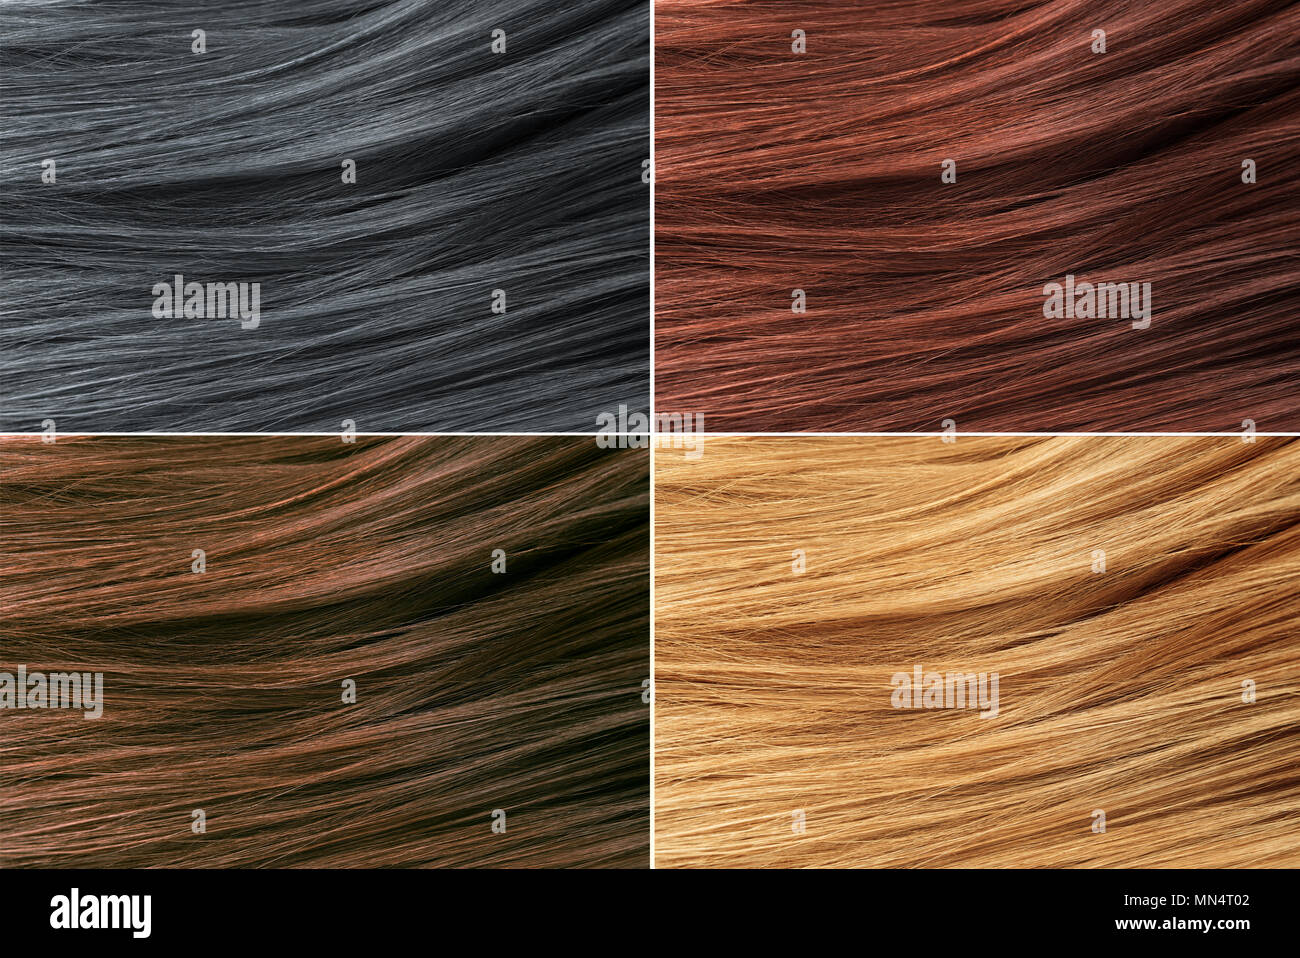 Hair Colors Palette. Hair Texture background, Hair colours set. Tints. Dyed Hair Color Samples. Stock Photo